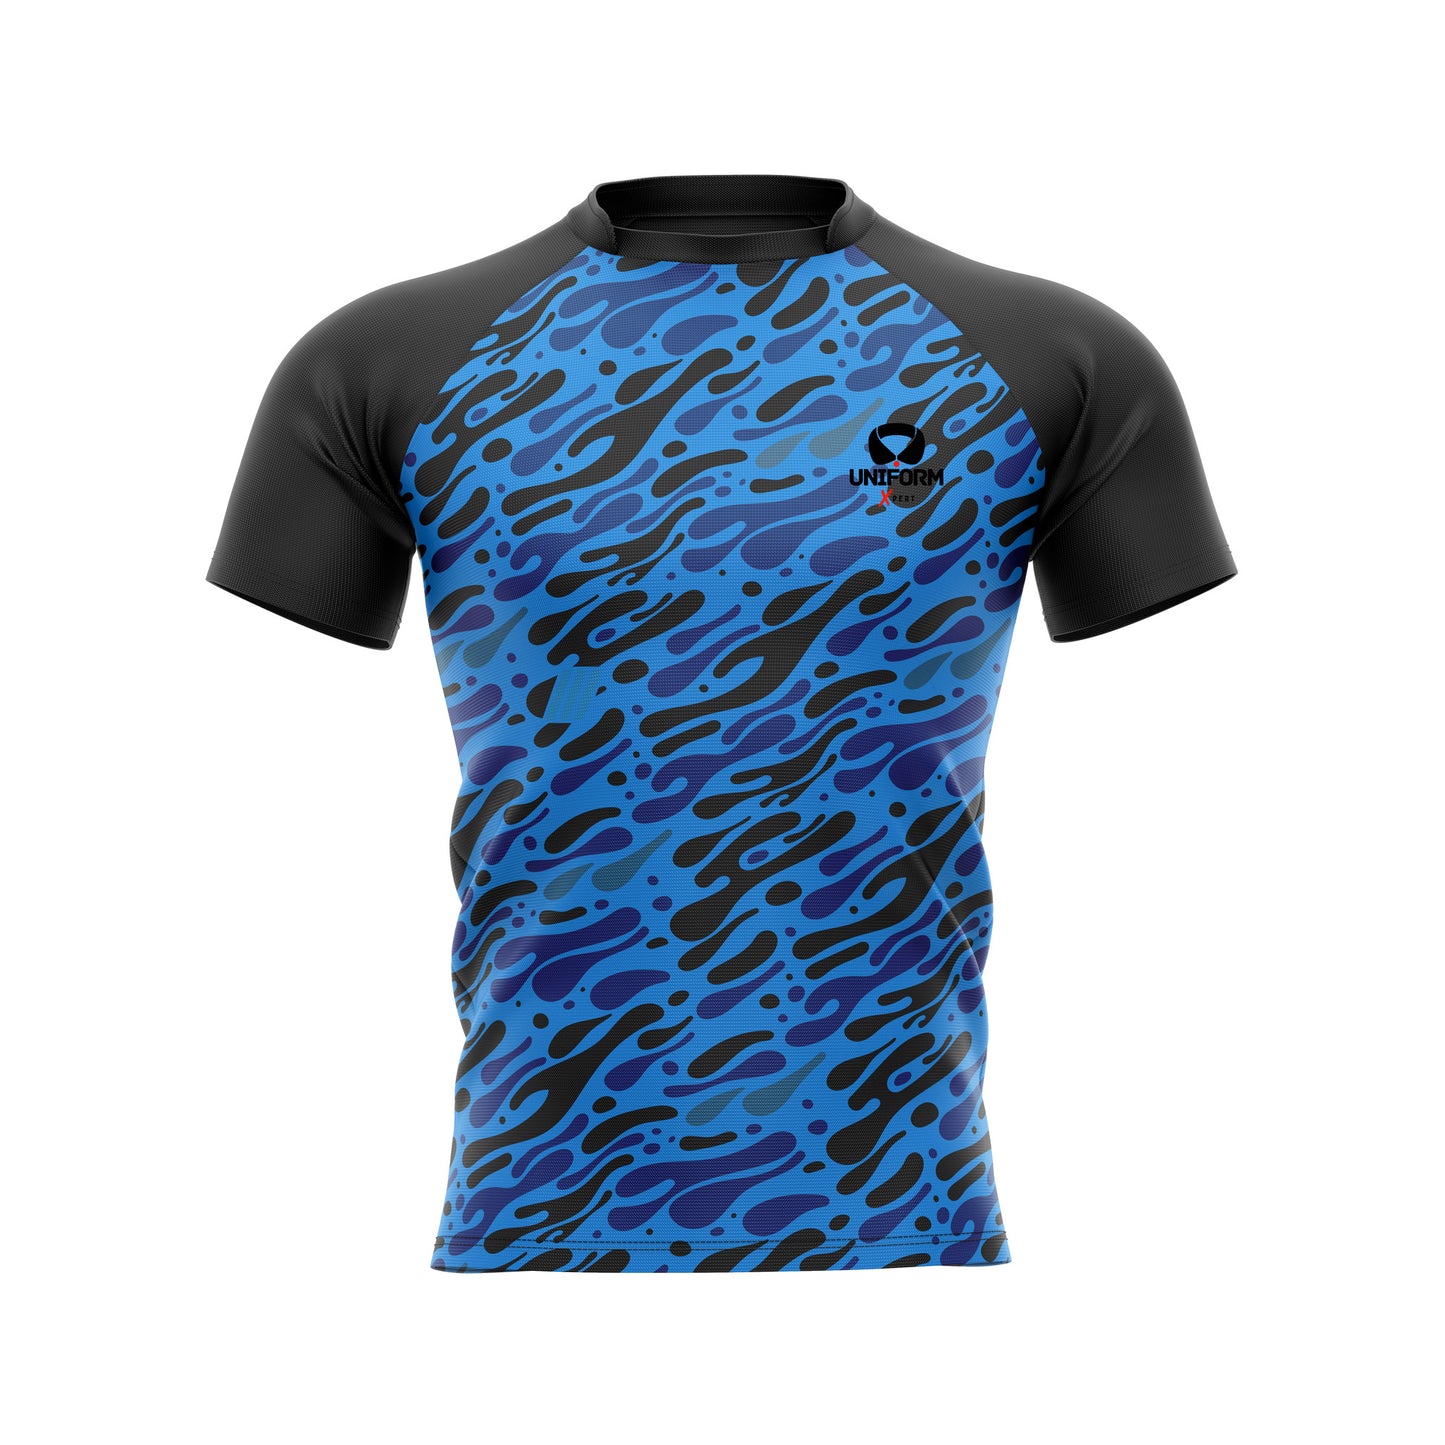 Custom Rugby Uniforms for Teams | Performance Rugby Kits